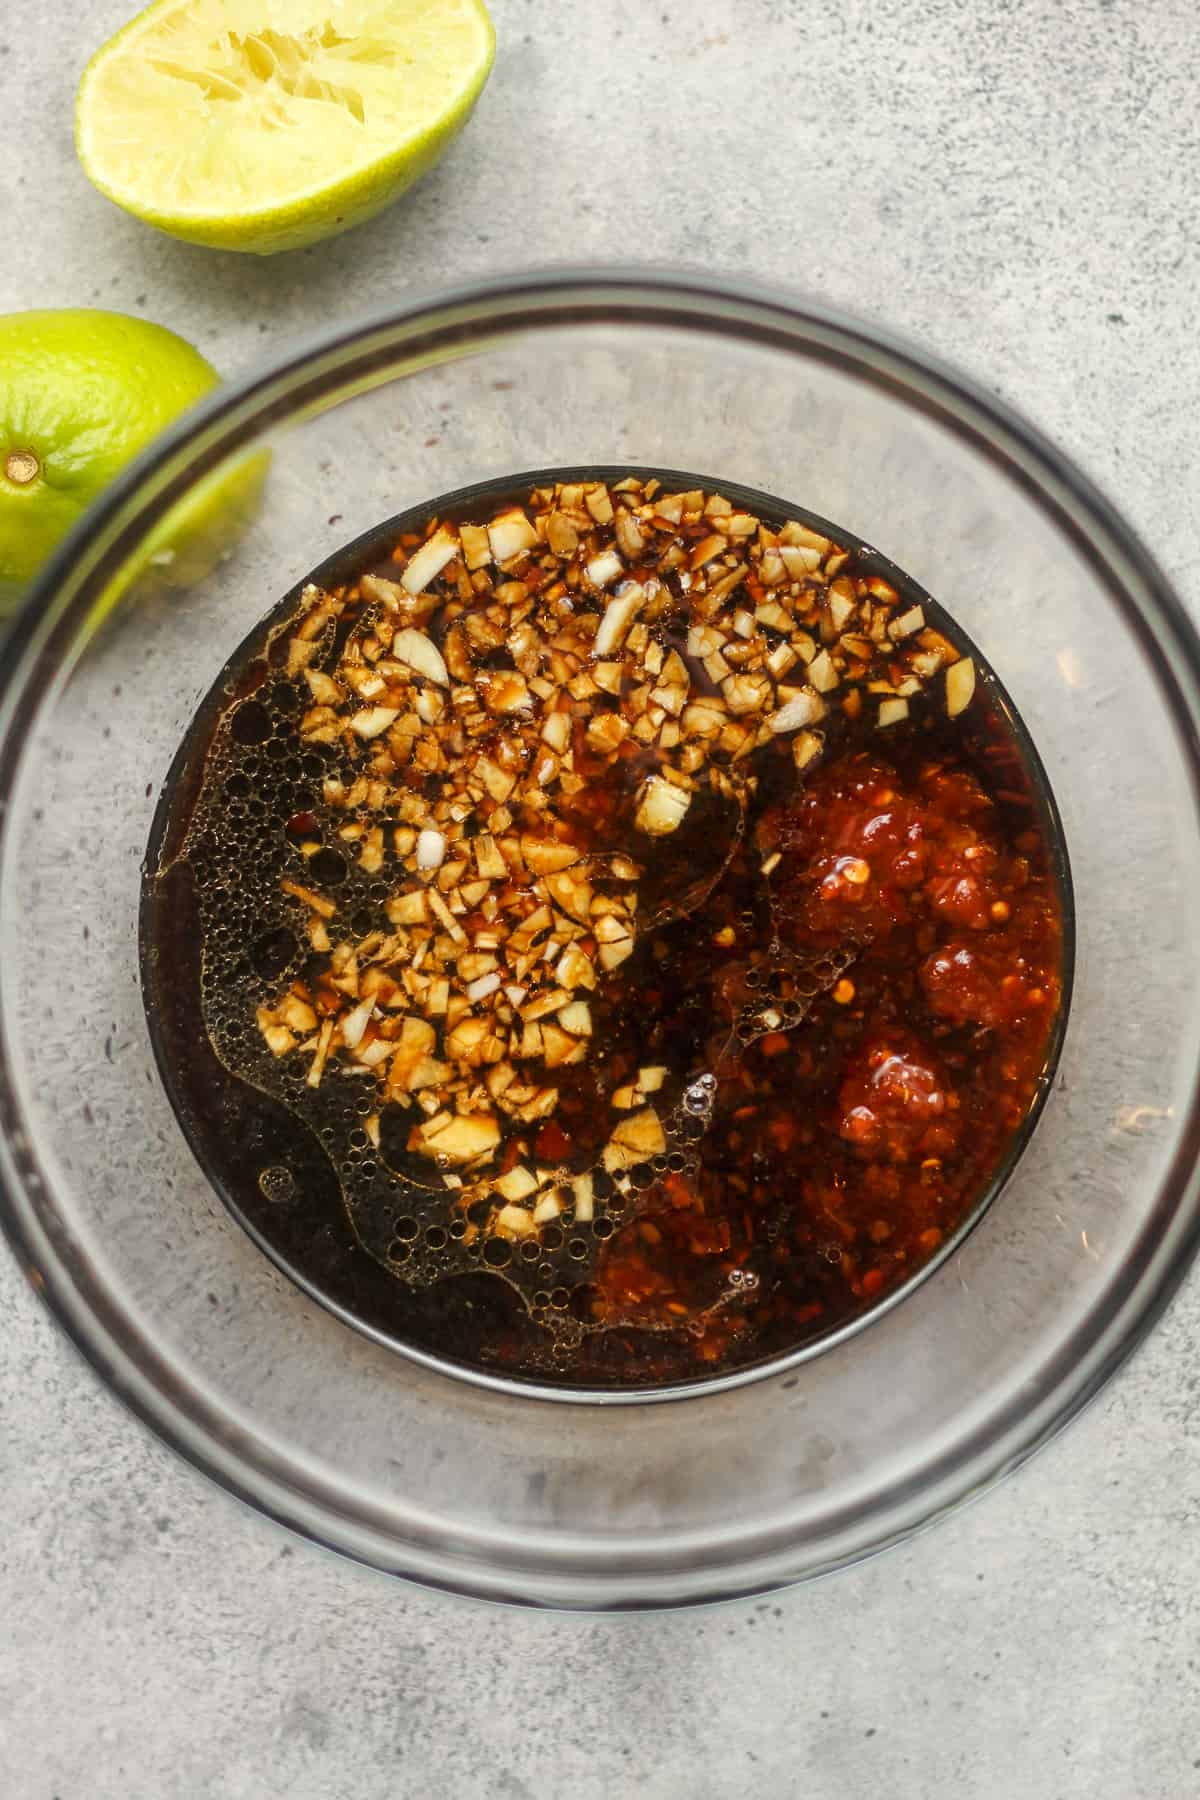 The Asian marinade in a bowl with limes.